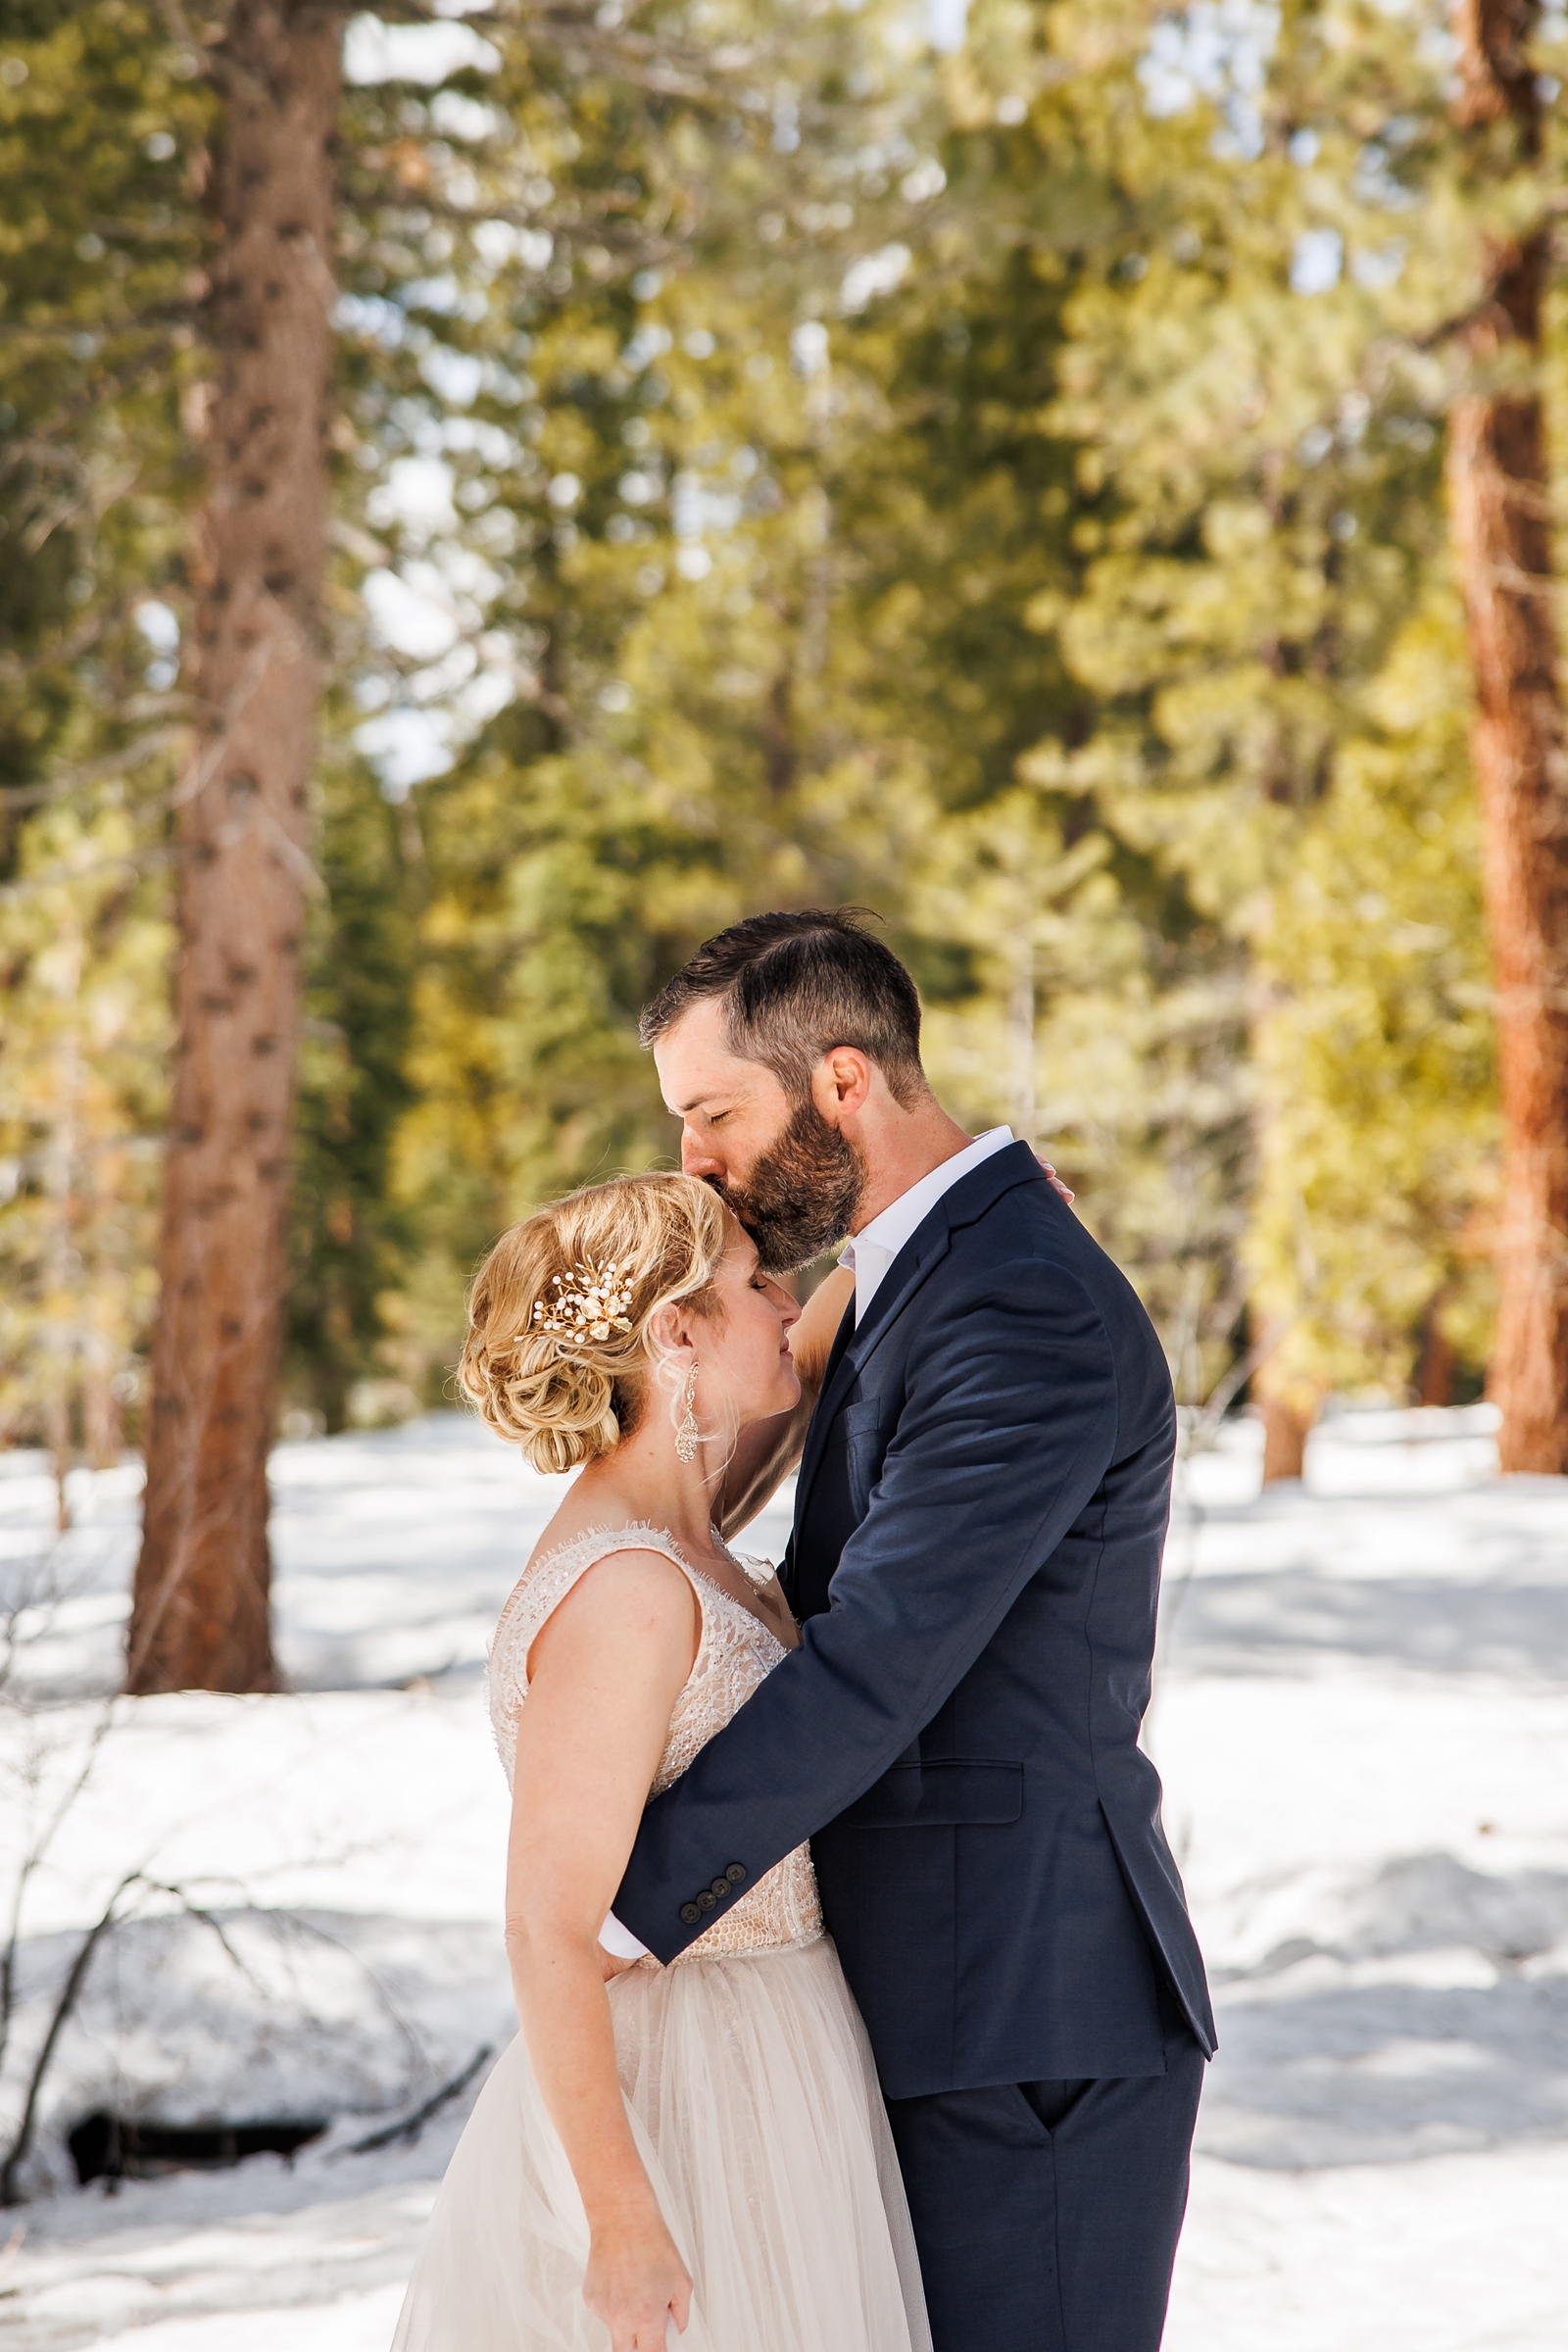 The happy couple embrace at Lake Tahoe.